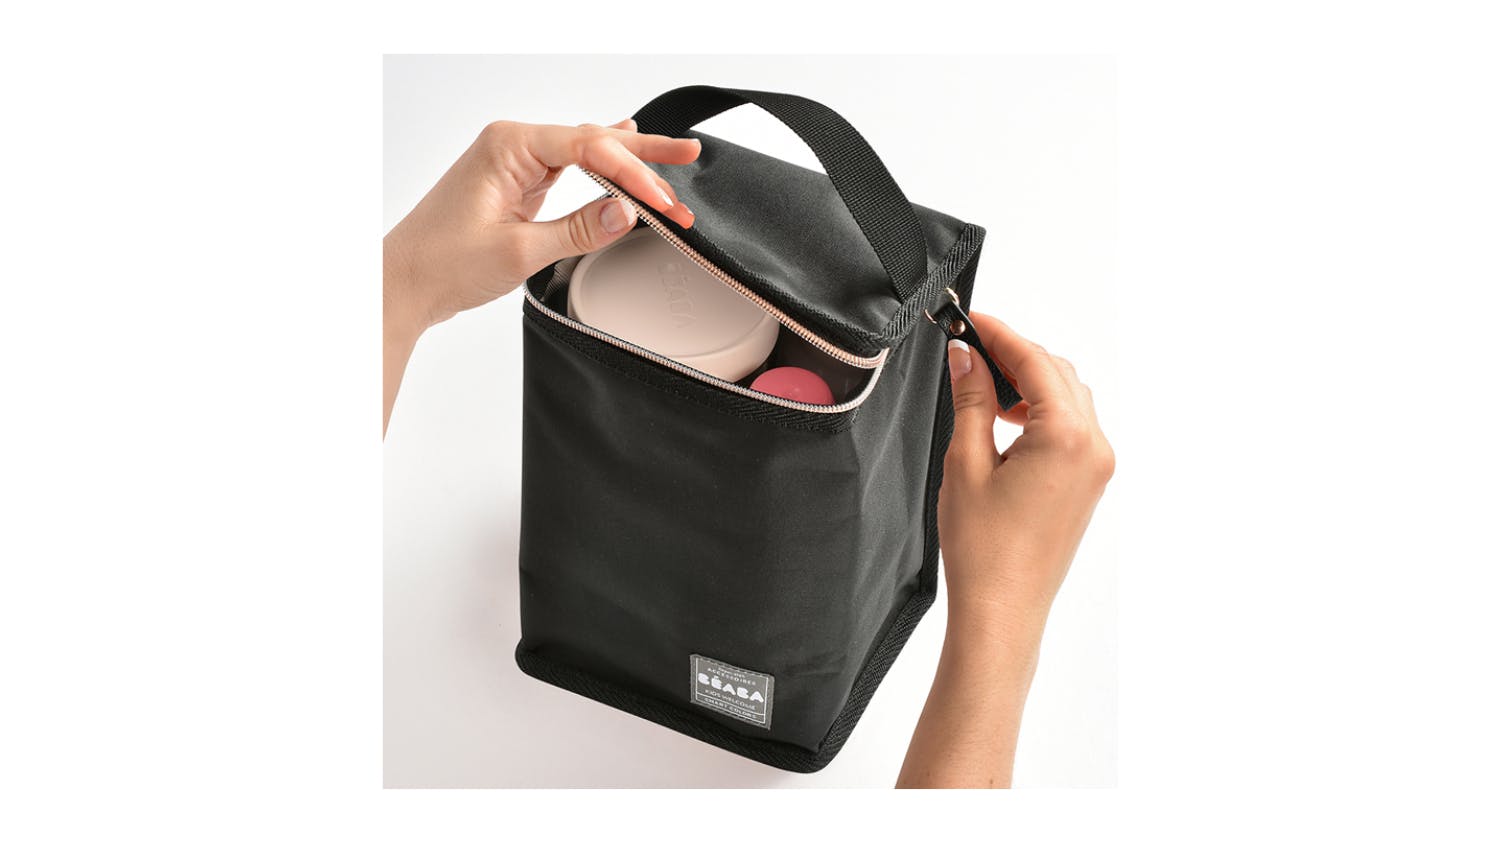 Beaba Isothermal Meal Pouch - Black/Pink Gold